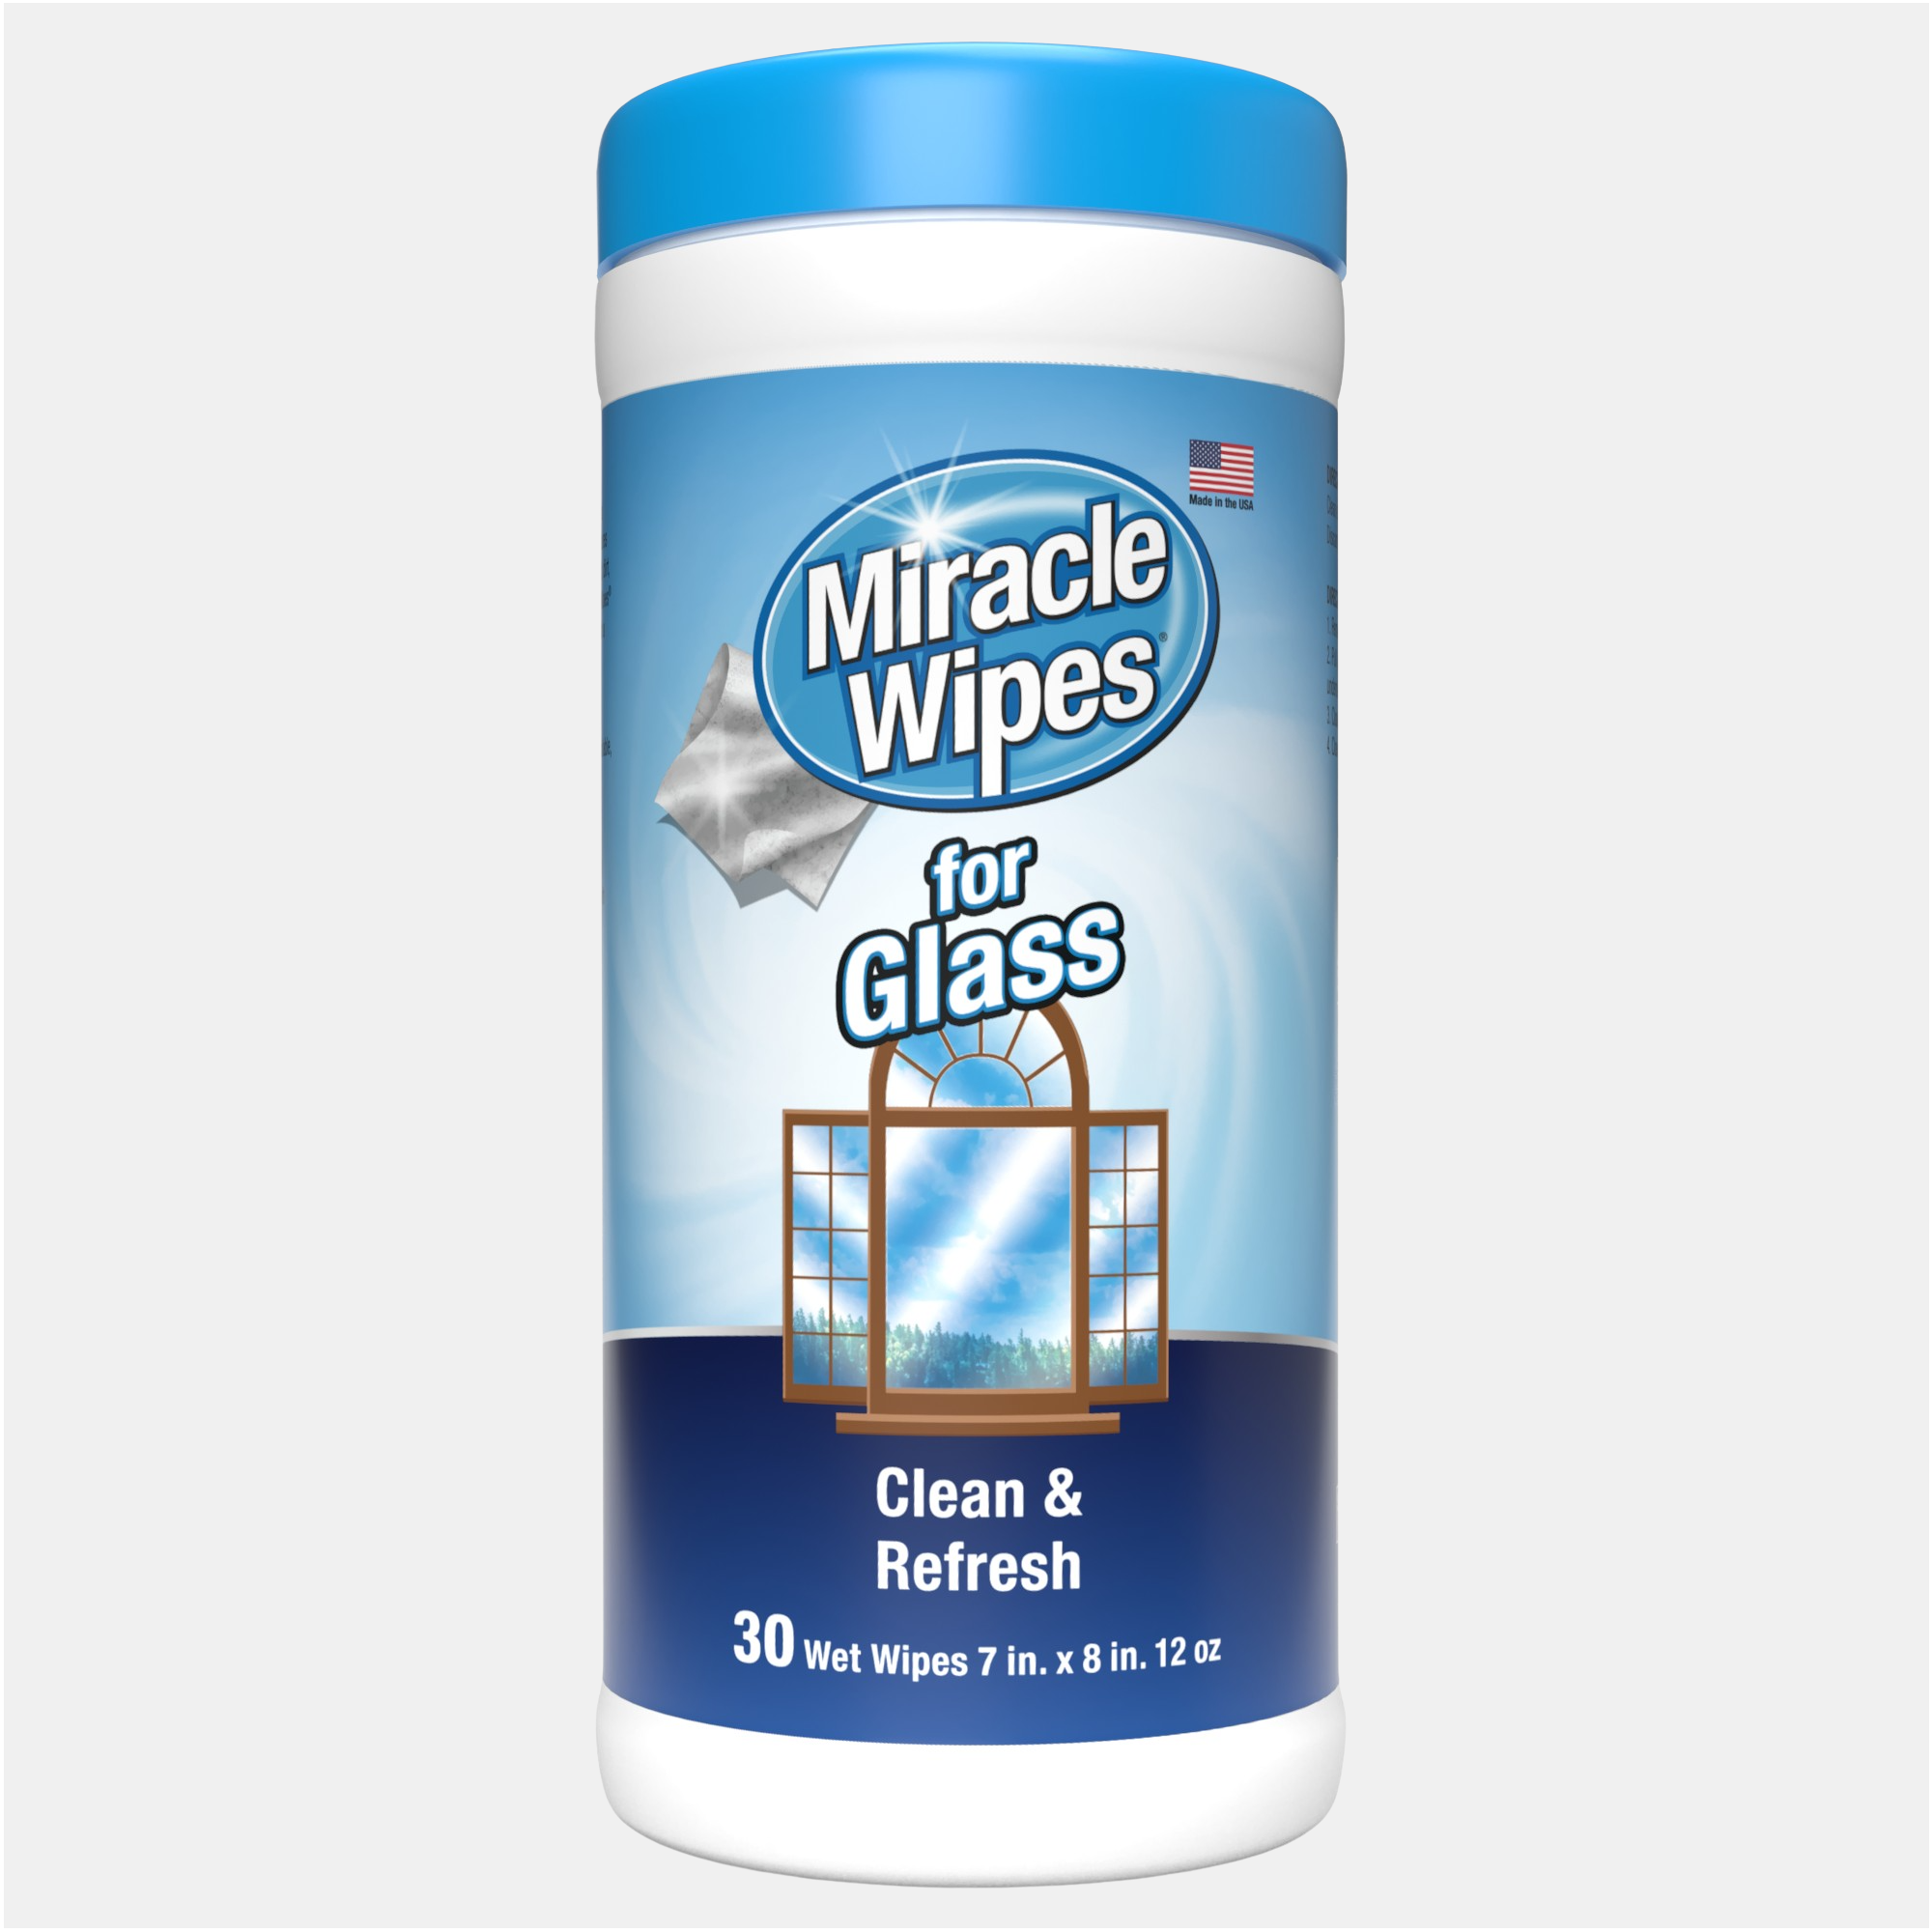 Miraclewipes for Glass - Disposable Streak Free Cleaning Wipes for Mirrors Windows Home and Auto - (30 Count)